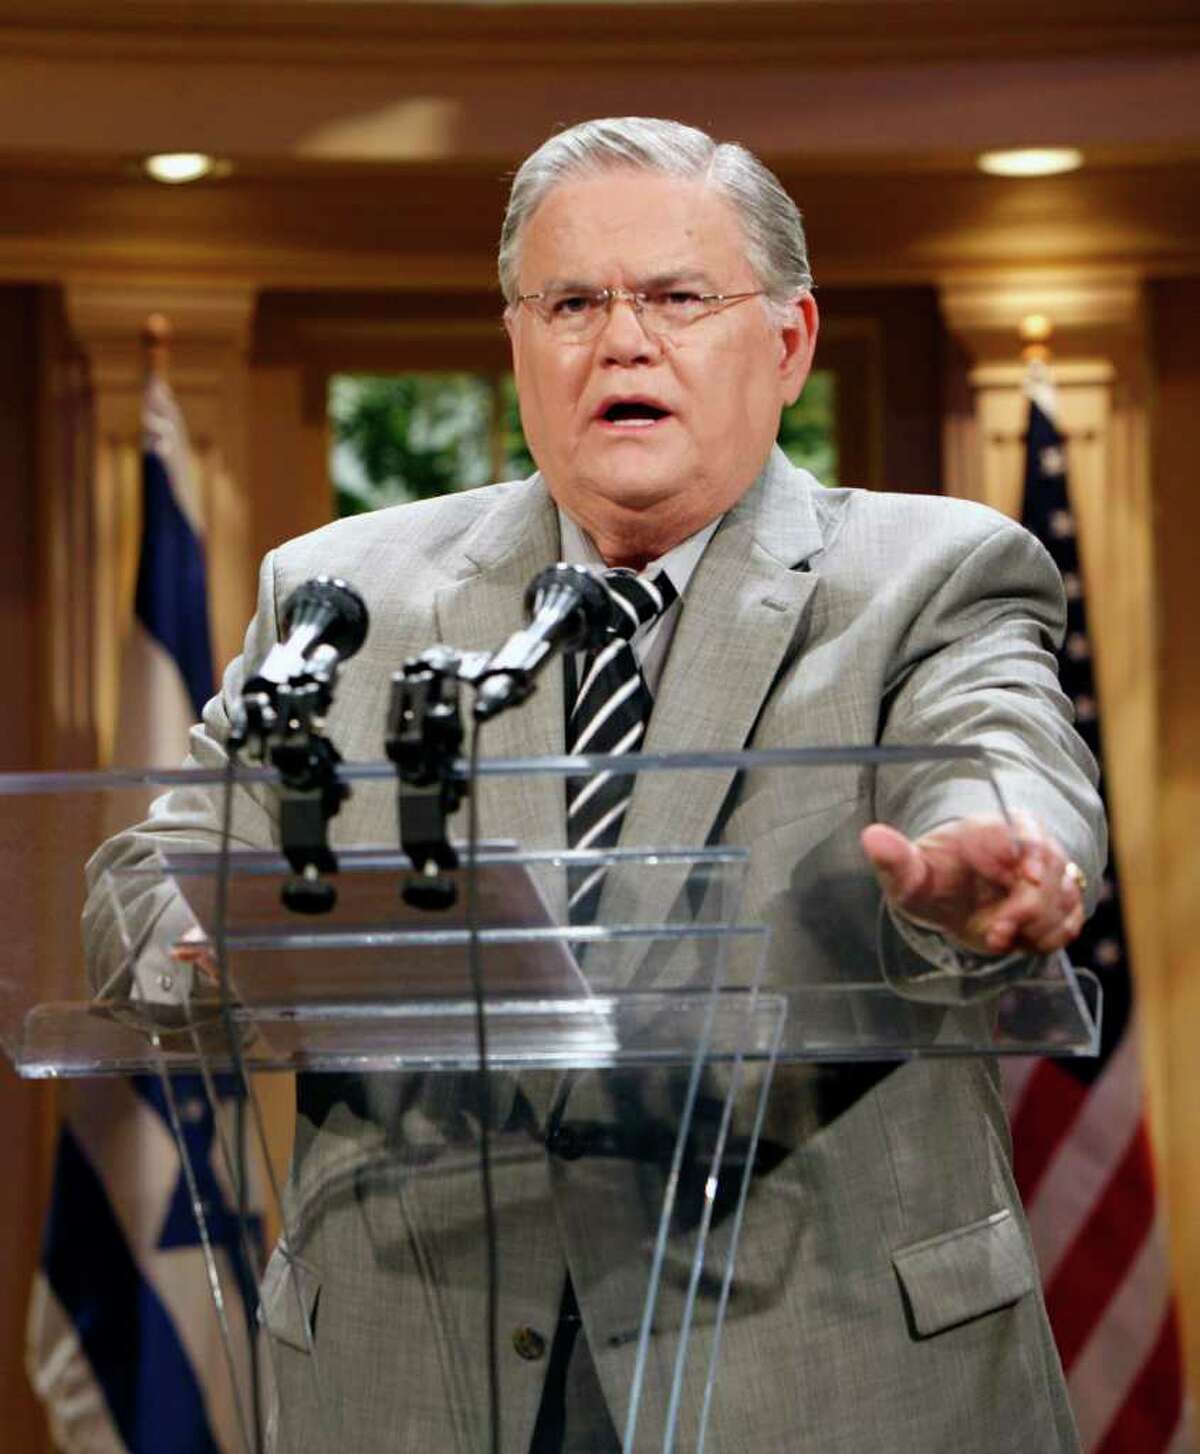 ** FILE ** In this May 23, 2008, file photo the Rev. John Hagee speaks during a news conference at the Cornerstone Church in San Antonio, Texas. Hagee, the internationally known radio/TV evangelist, is recovering after undergoing open heart surgery Thursday, Oct. 2, 2008.